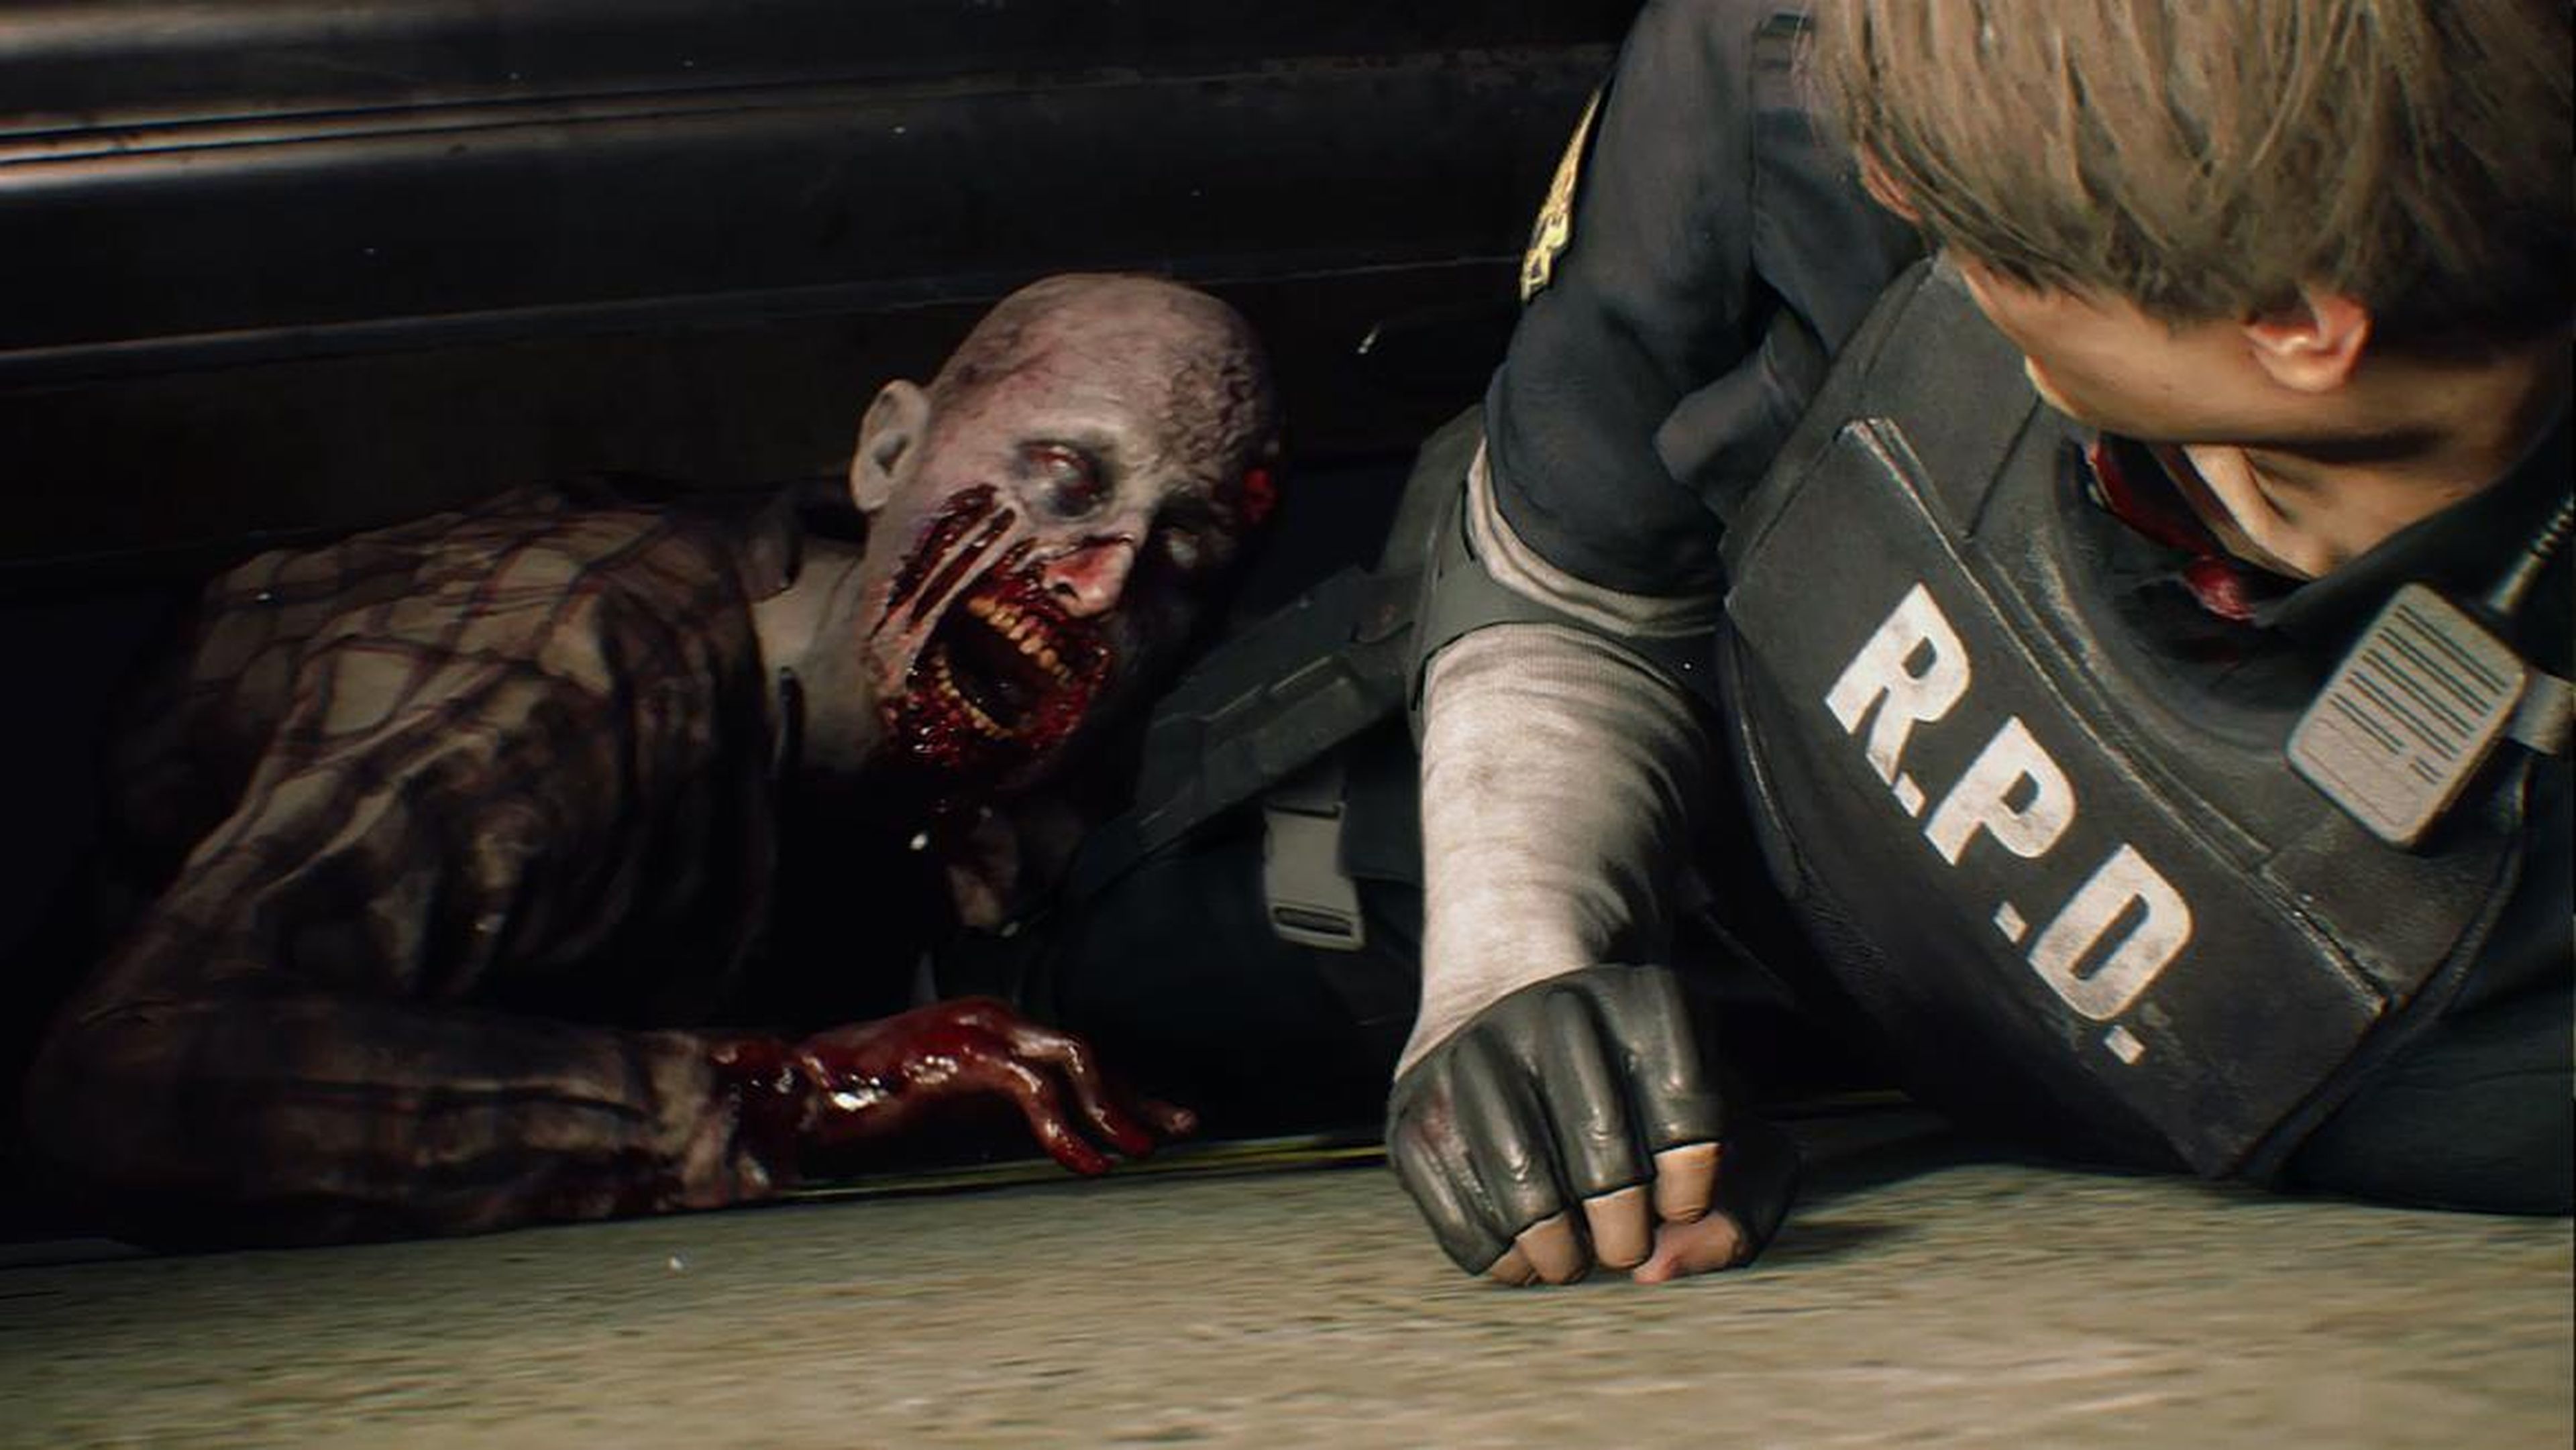 Zombies in "Resident Evil" are the product of the T-virus, a bioweapon developed by the evil Umbrella Corporation.